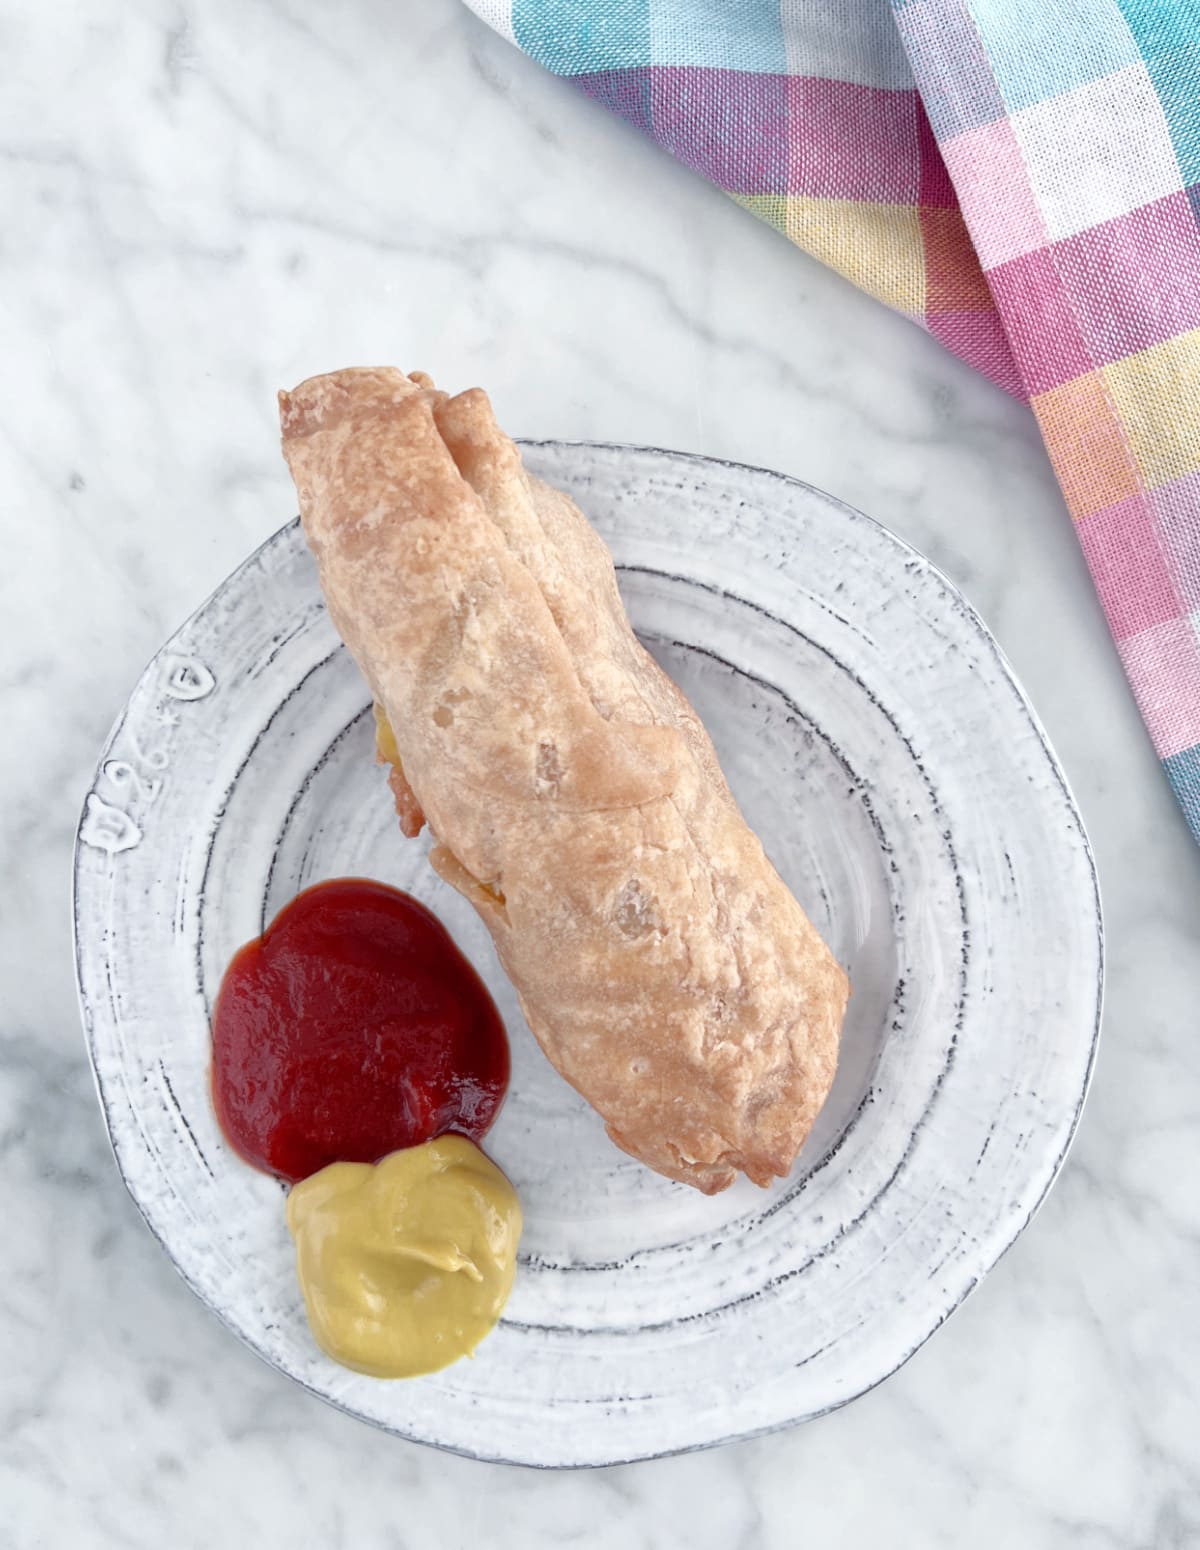 Overhead view of a hot dog with cheese wrapped in baked pastry sitting on a rustic grey dish with blobs of bright red ketchup and classic yellow mustard. Sitting on a white marble table with a pastel plaid cloth napkin.